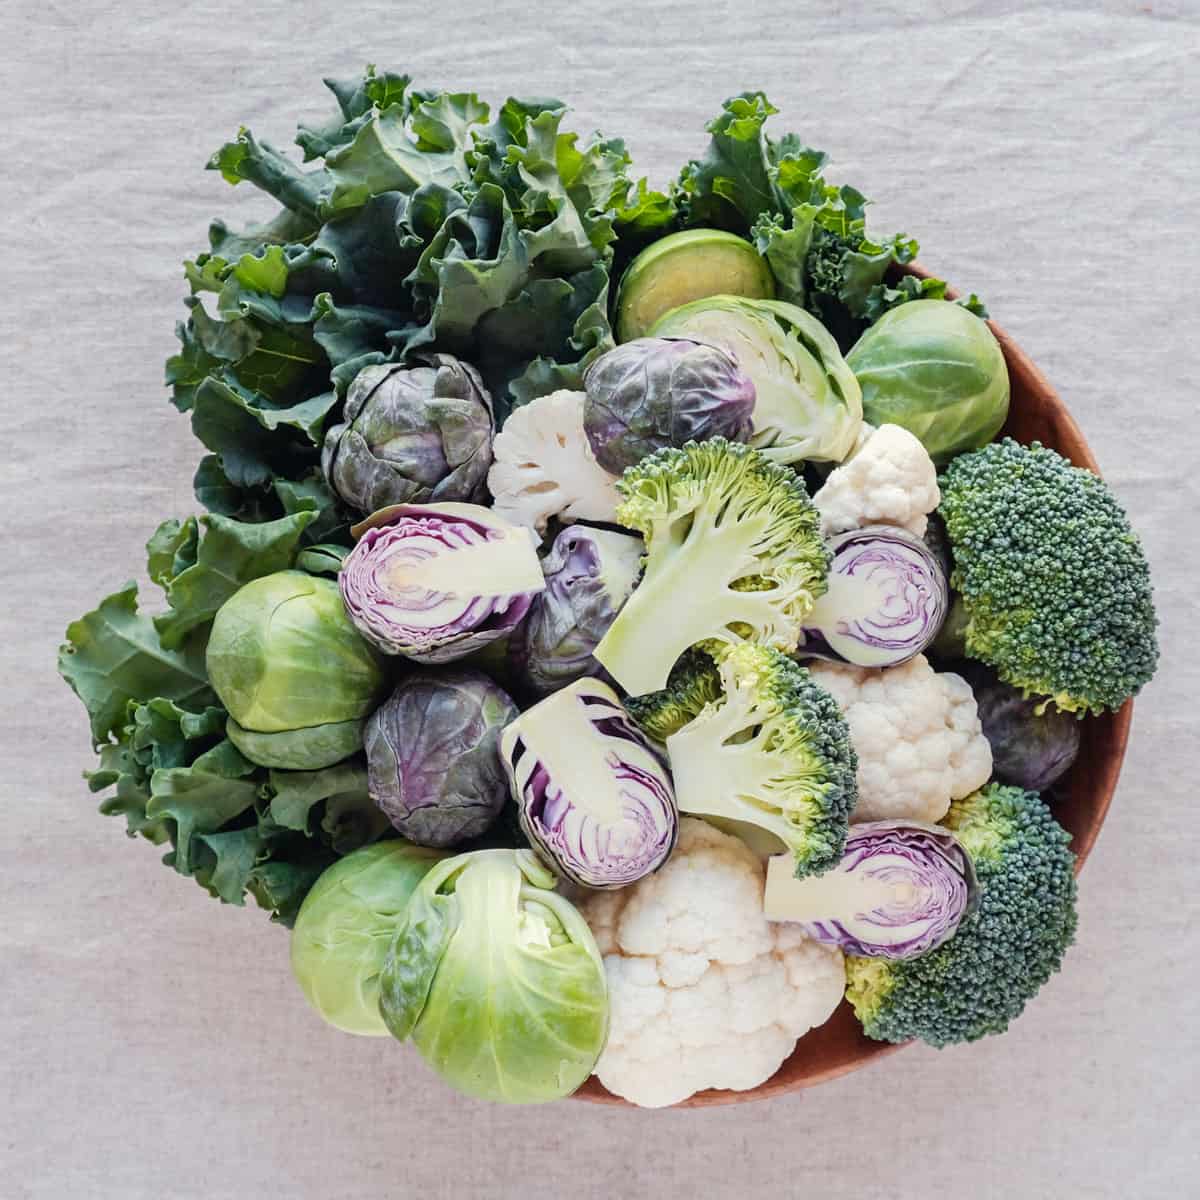 A bowl of kale, broccoli, brussels sprouts and cauliflower.